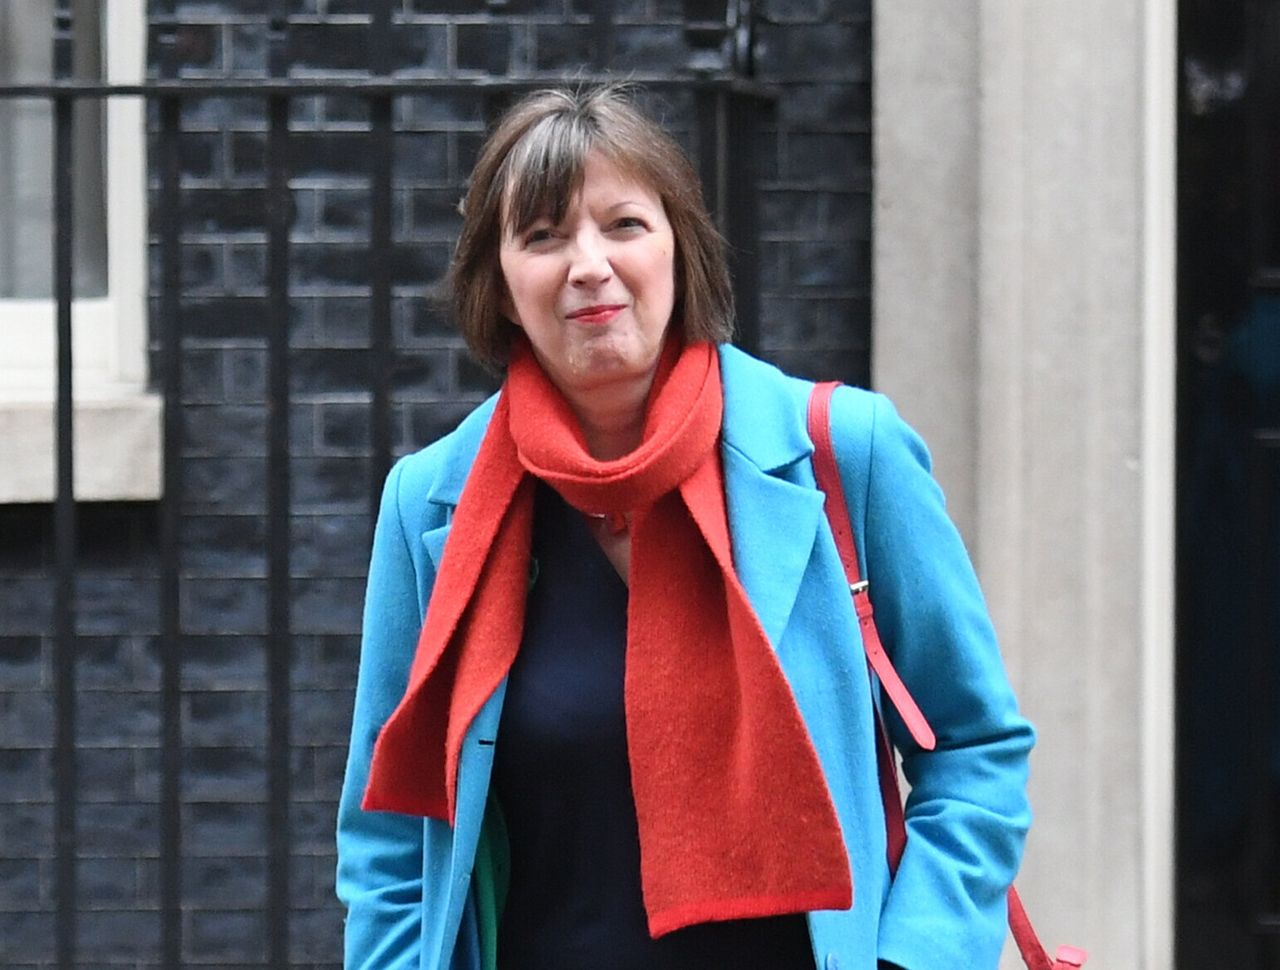 The TUC's Frances O'Grady has held talks with the government on helping workers through the coronavirus crisis